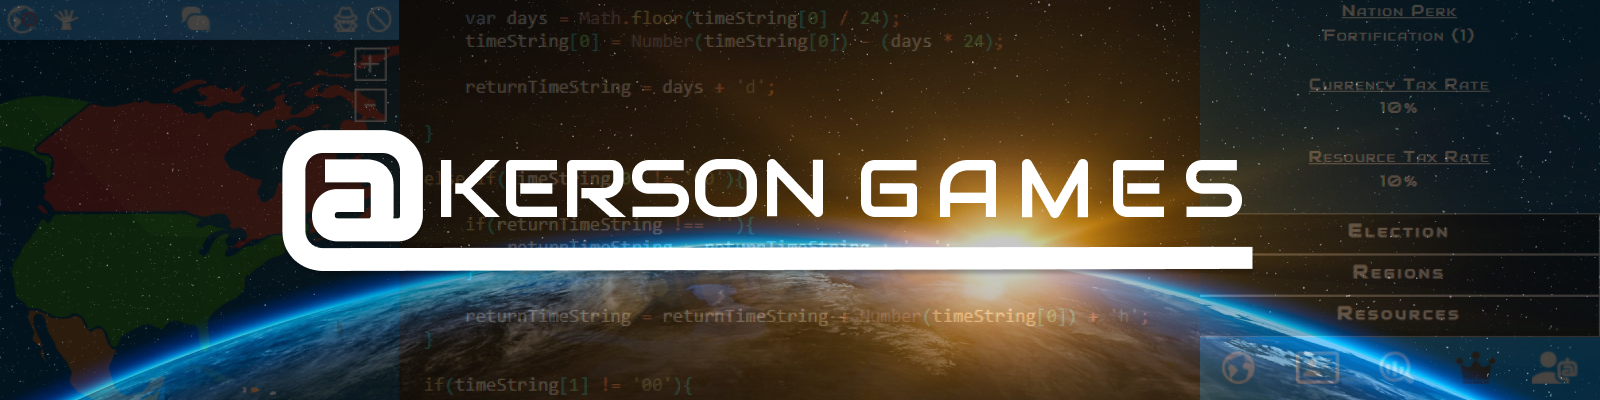 Kerson Games site banner